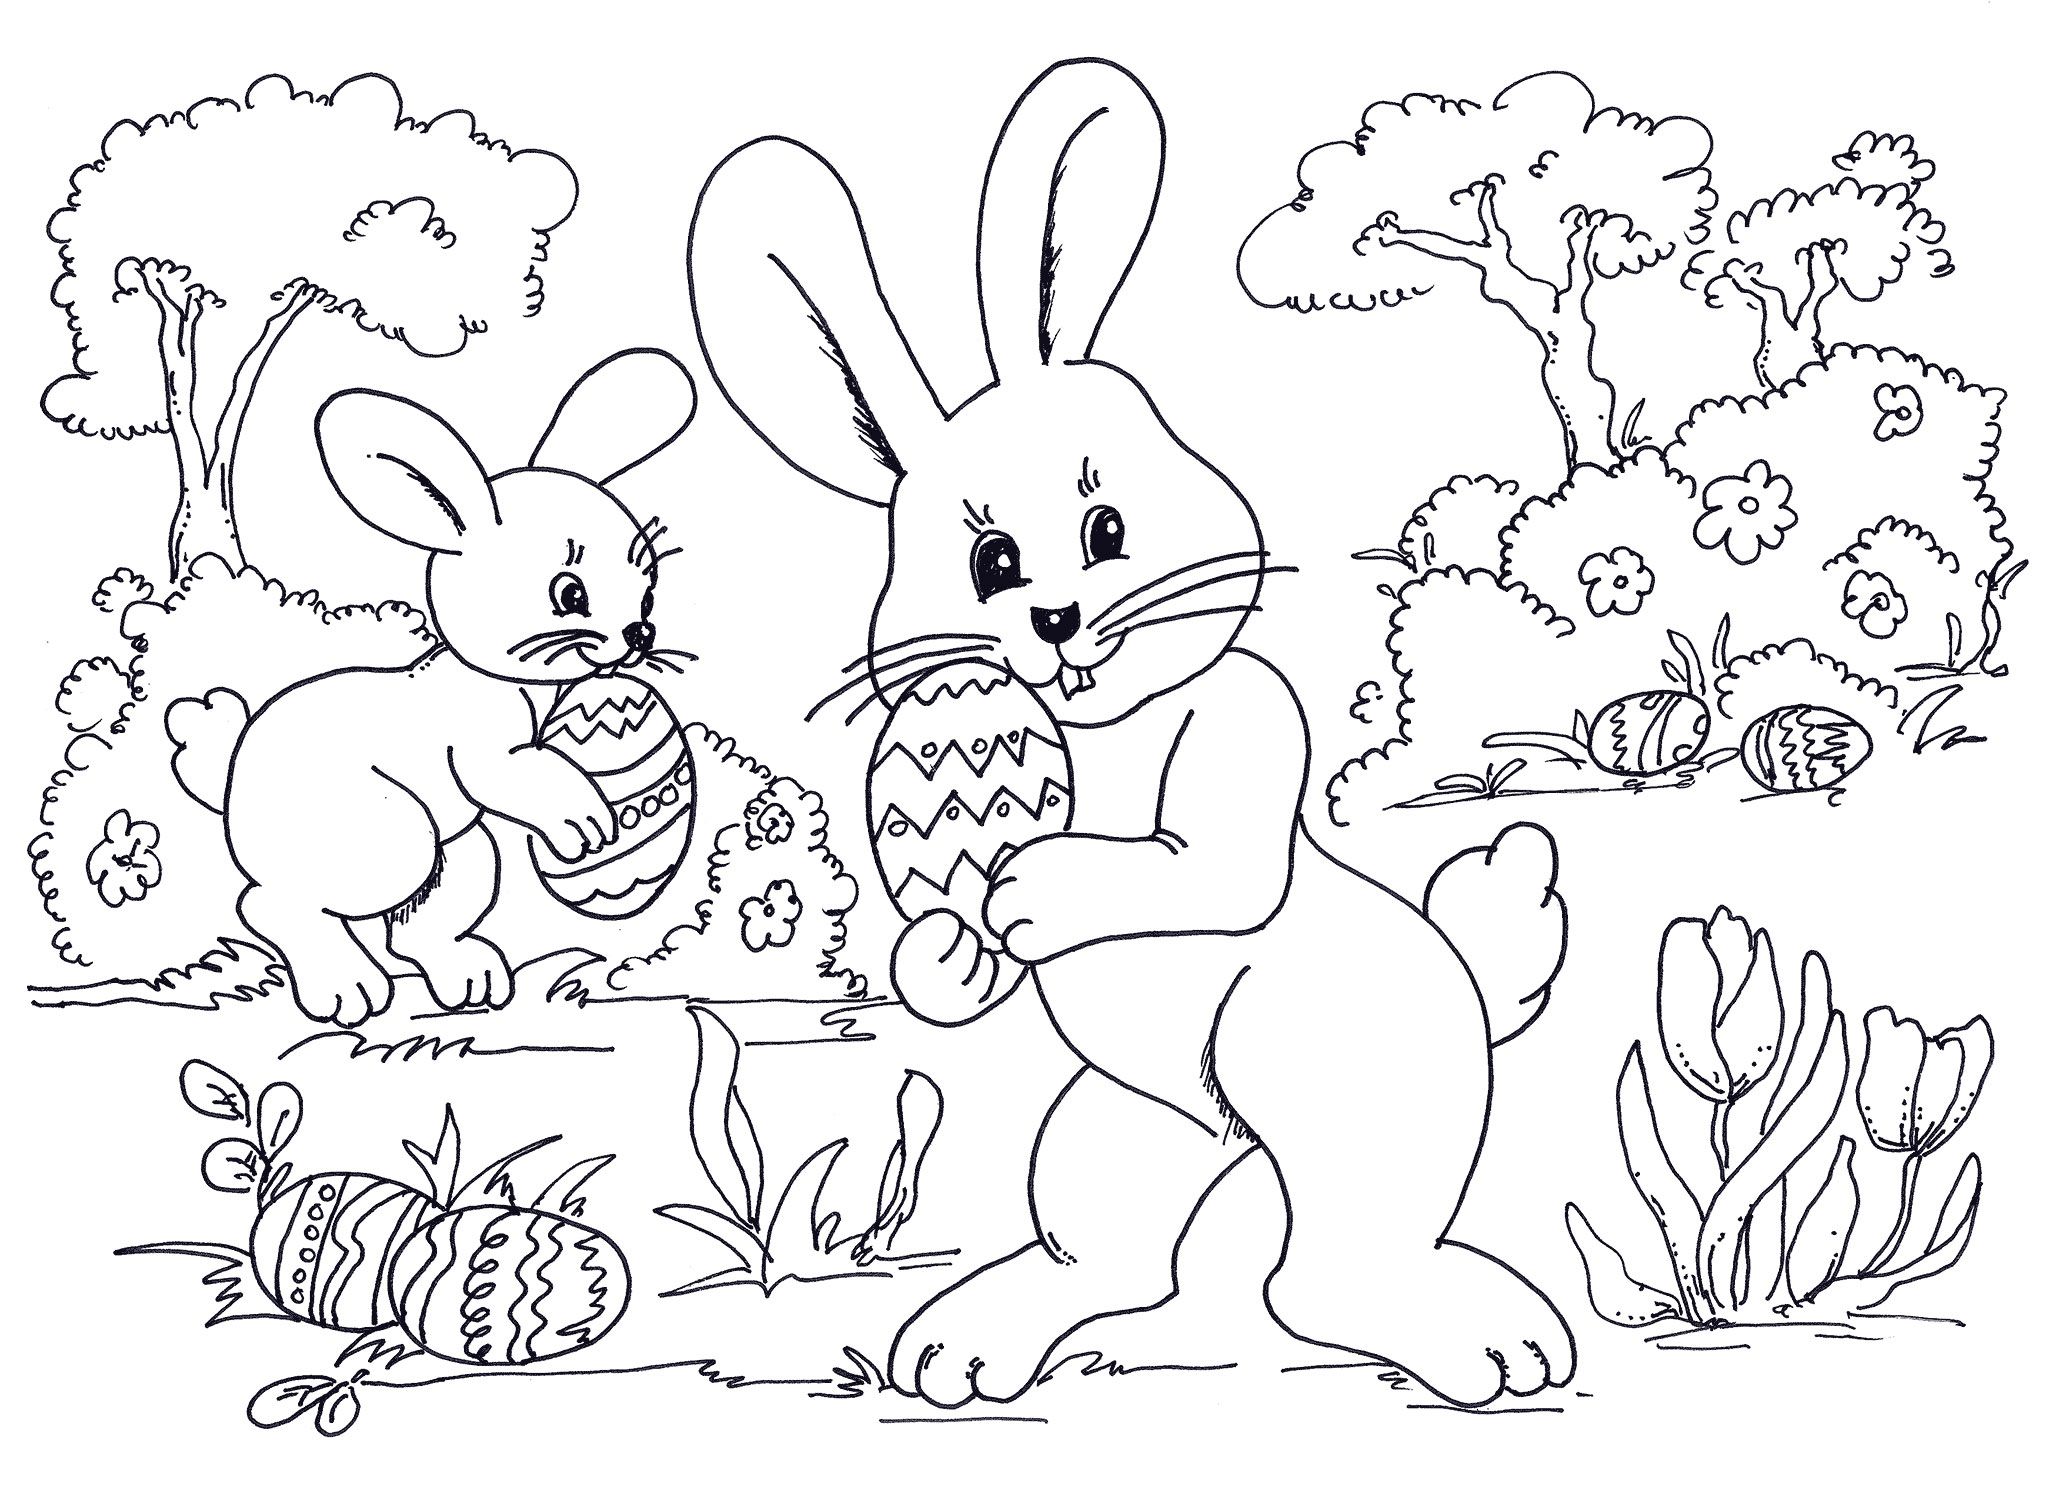 Happy Easter Coloring Pages Great pdf to print - Coloring pages